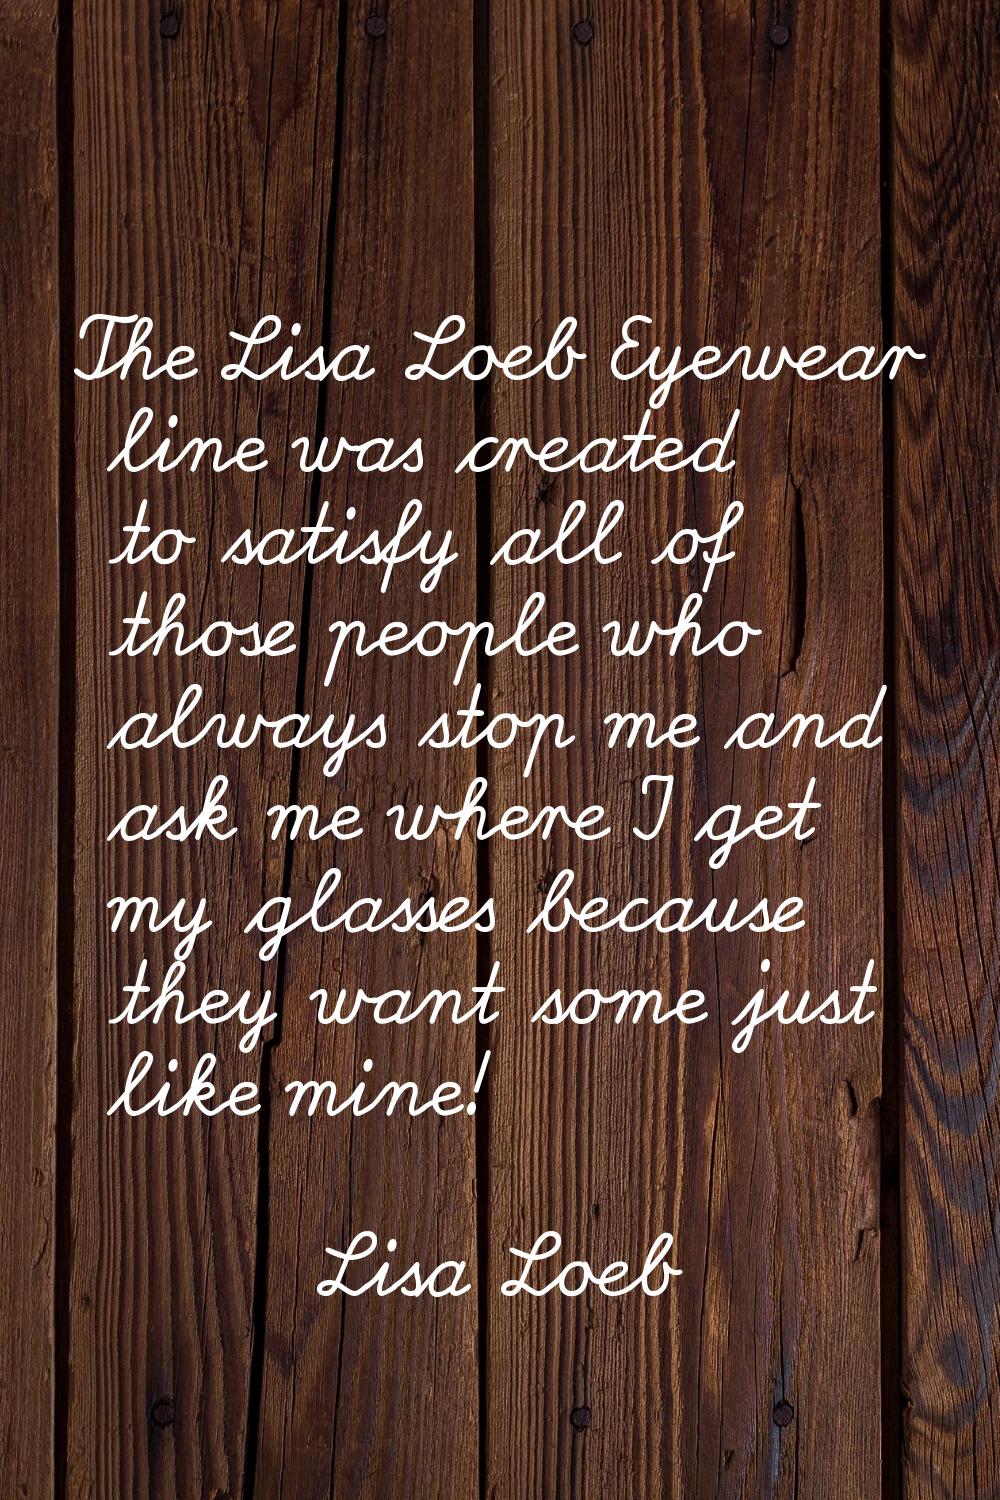 The Lisa Loeb Eyewear line was created to satisfy all of those people who always stop me and ask me